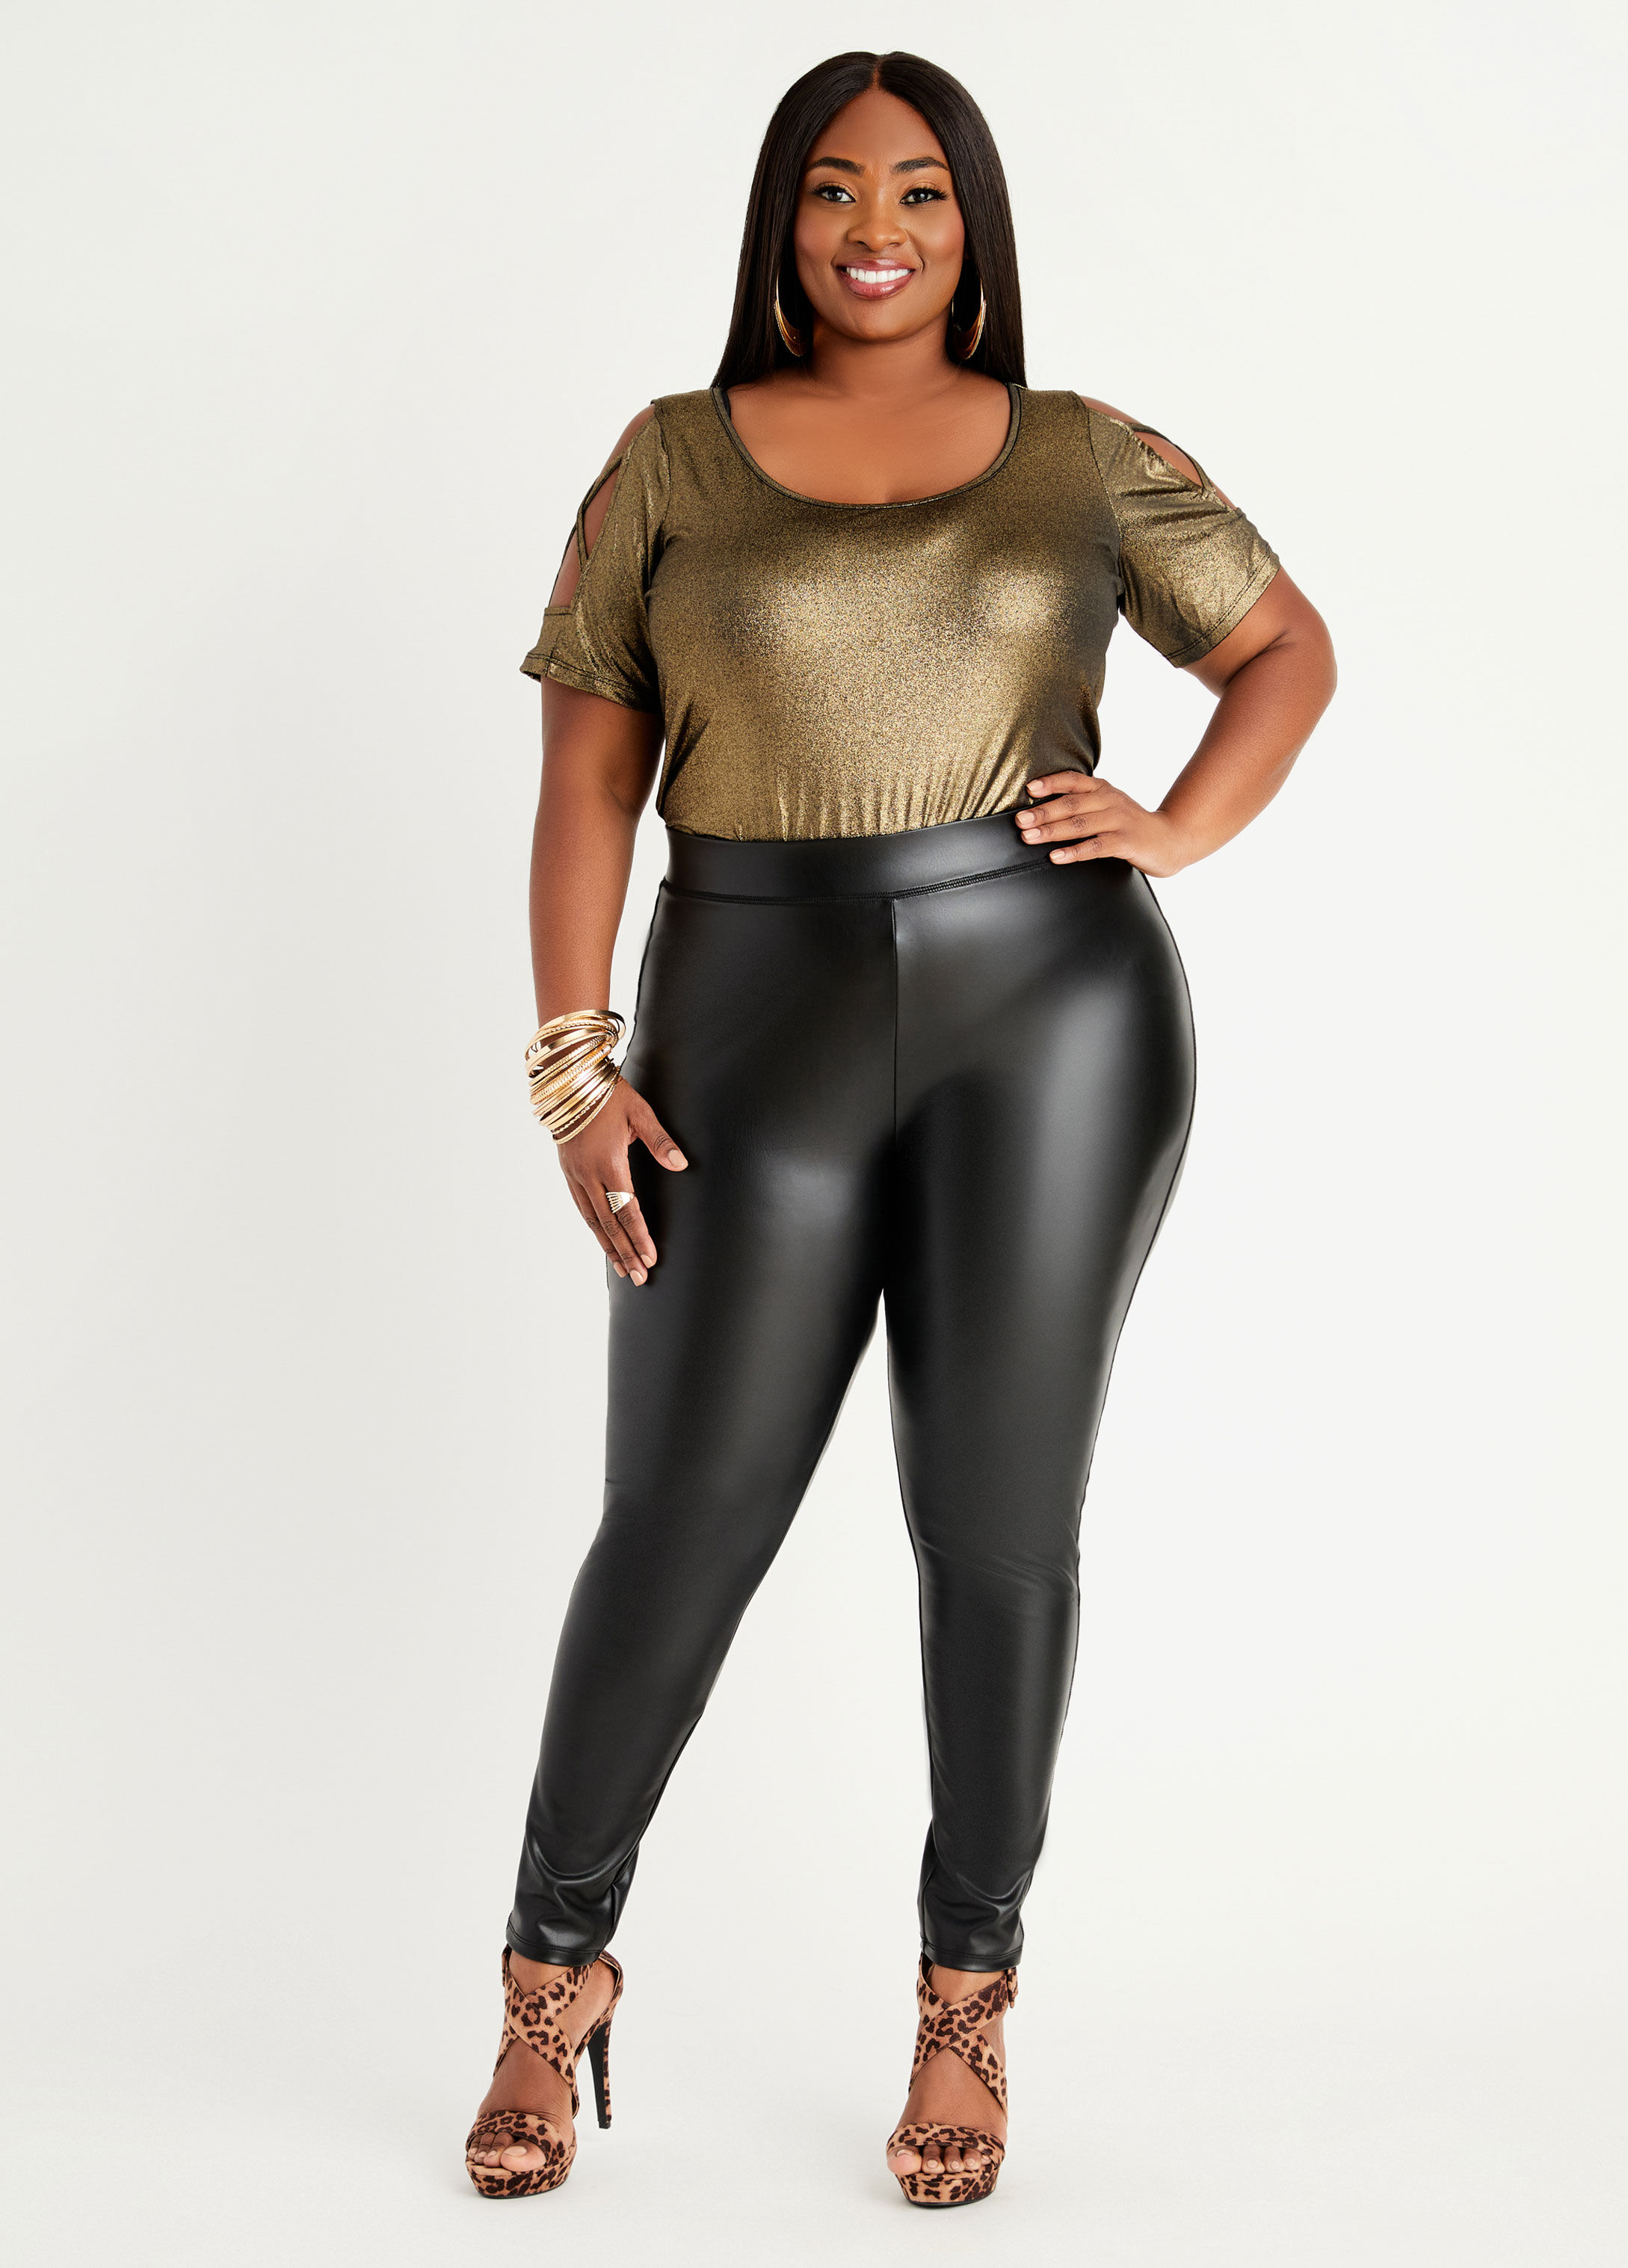 Top more than 118 tall faux leather leggings super hot